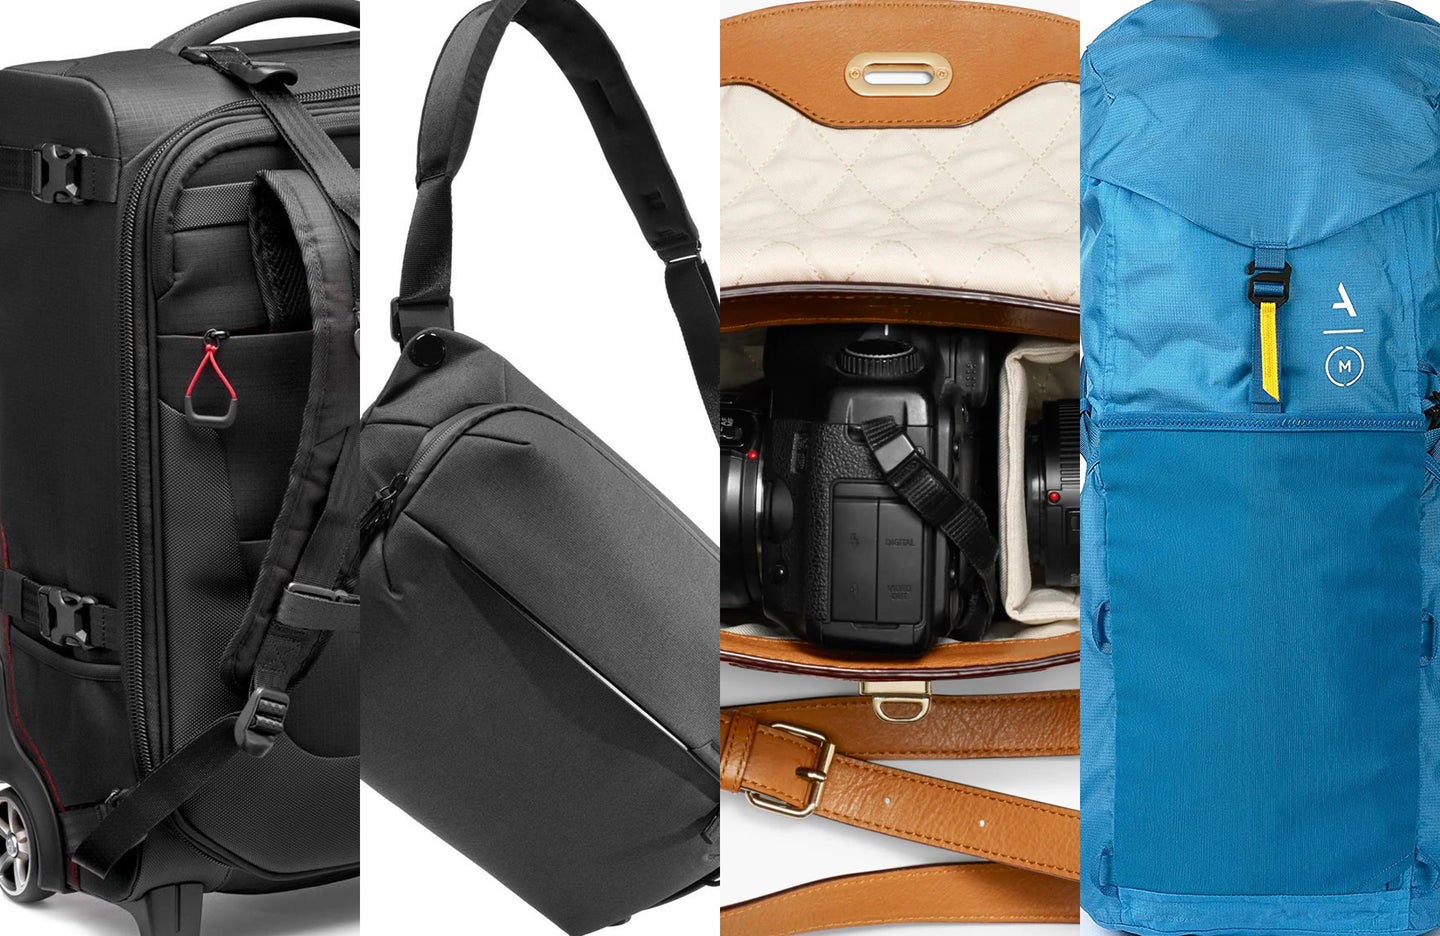 A selection of camera bags